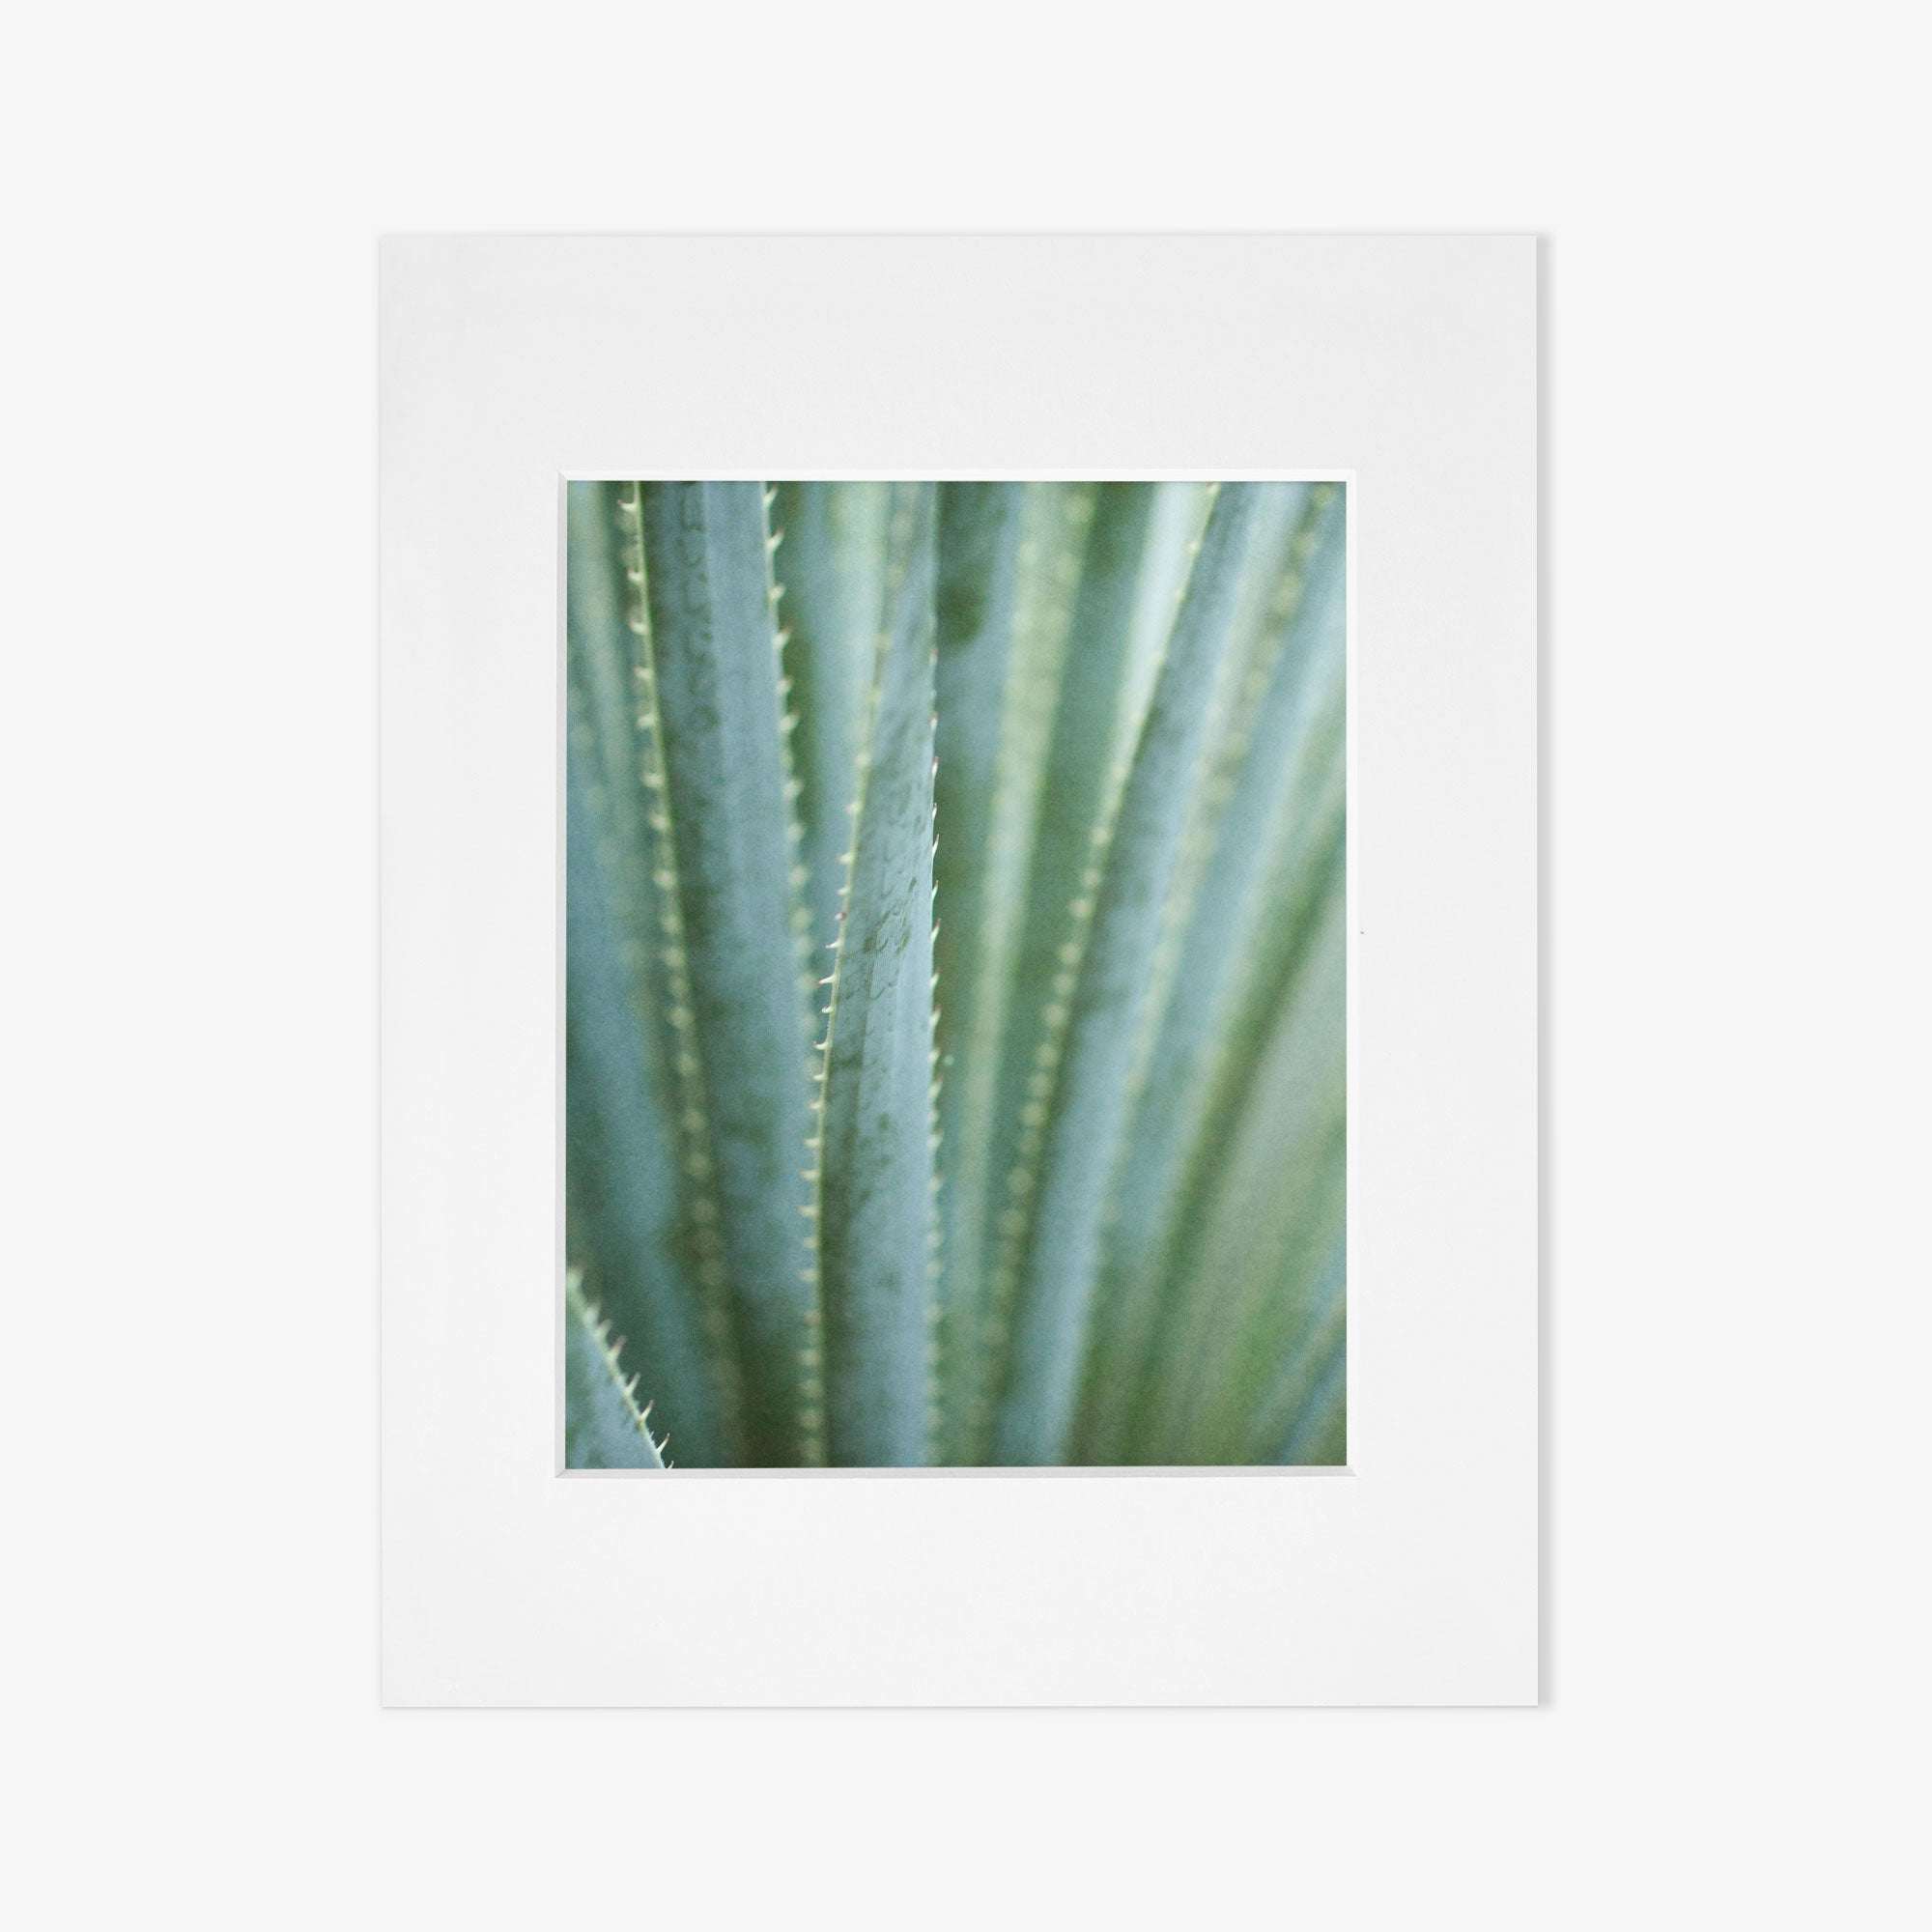 A minimalistic white square picture frame with a centered gray placeholder featuring Offley Green&#39;s &#39;Strands and Spikes II&#39; green botanical print, set against a white background.